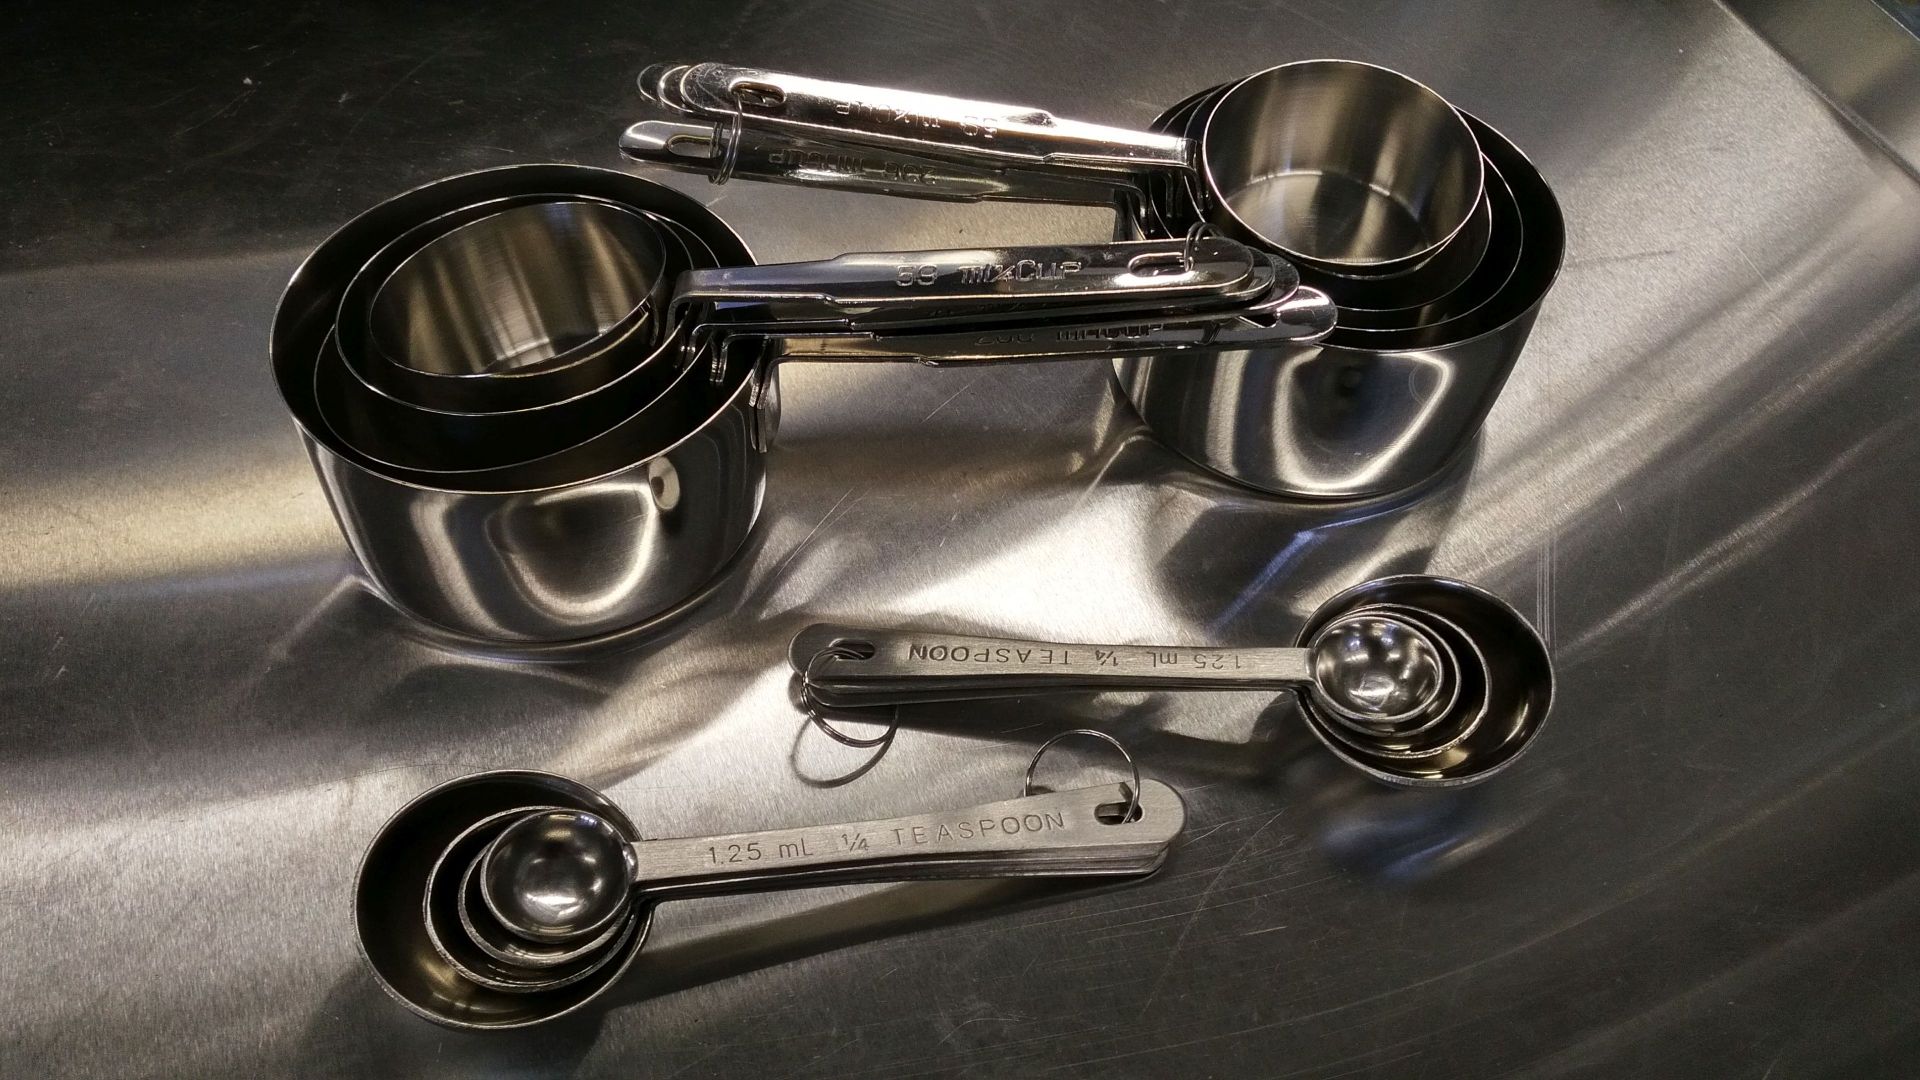 Stainless Measuring Cups & Spoons - Lot of 2 Sets (16 Pieces)